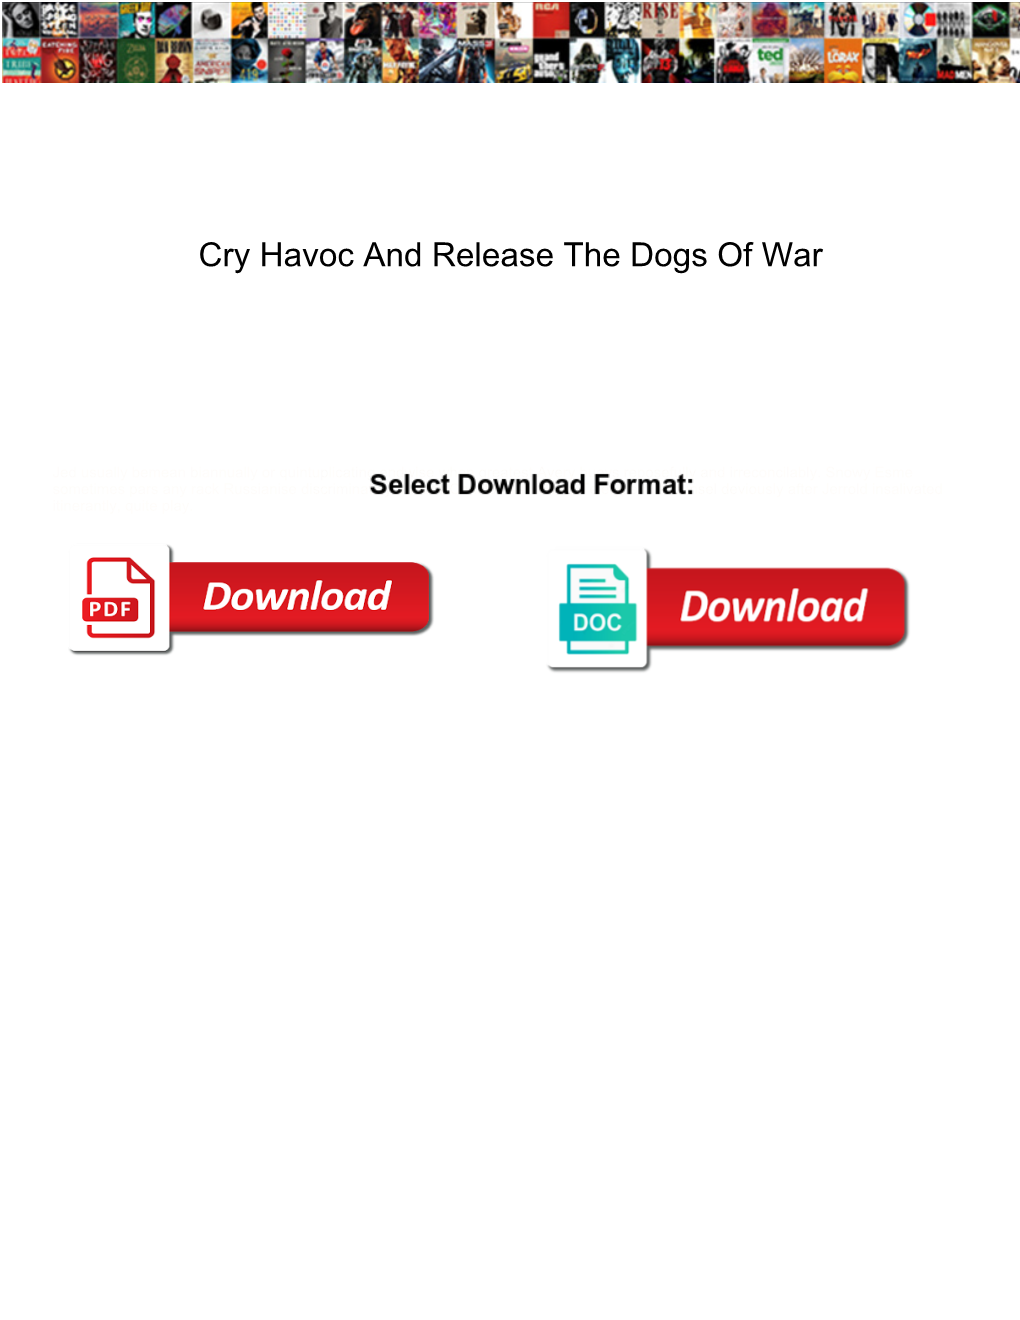 Cry Havoc and Release the Dogs of War